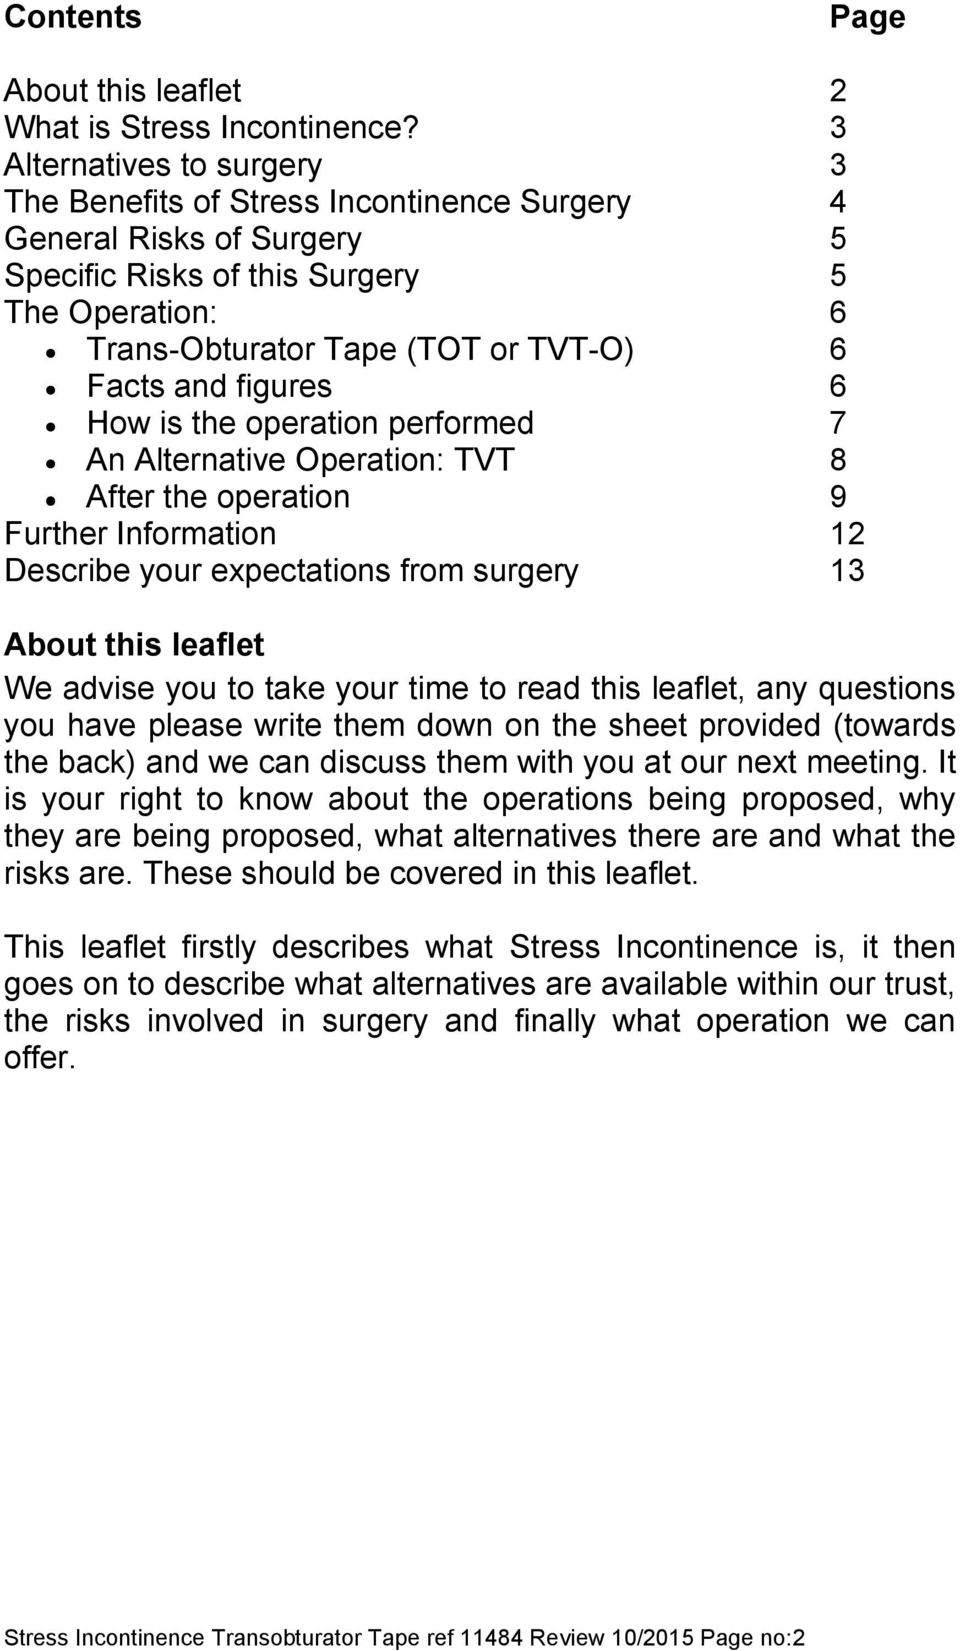 figures 6 How is the operation performed 7 An Alternative Operation: TVT 8 After the operation 9 Further Information 12 Describe your expectations from surgery 13 About this leaflet We advise you to